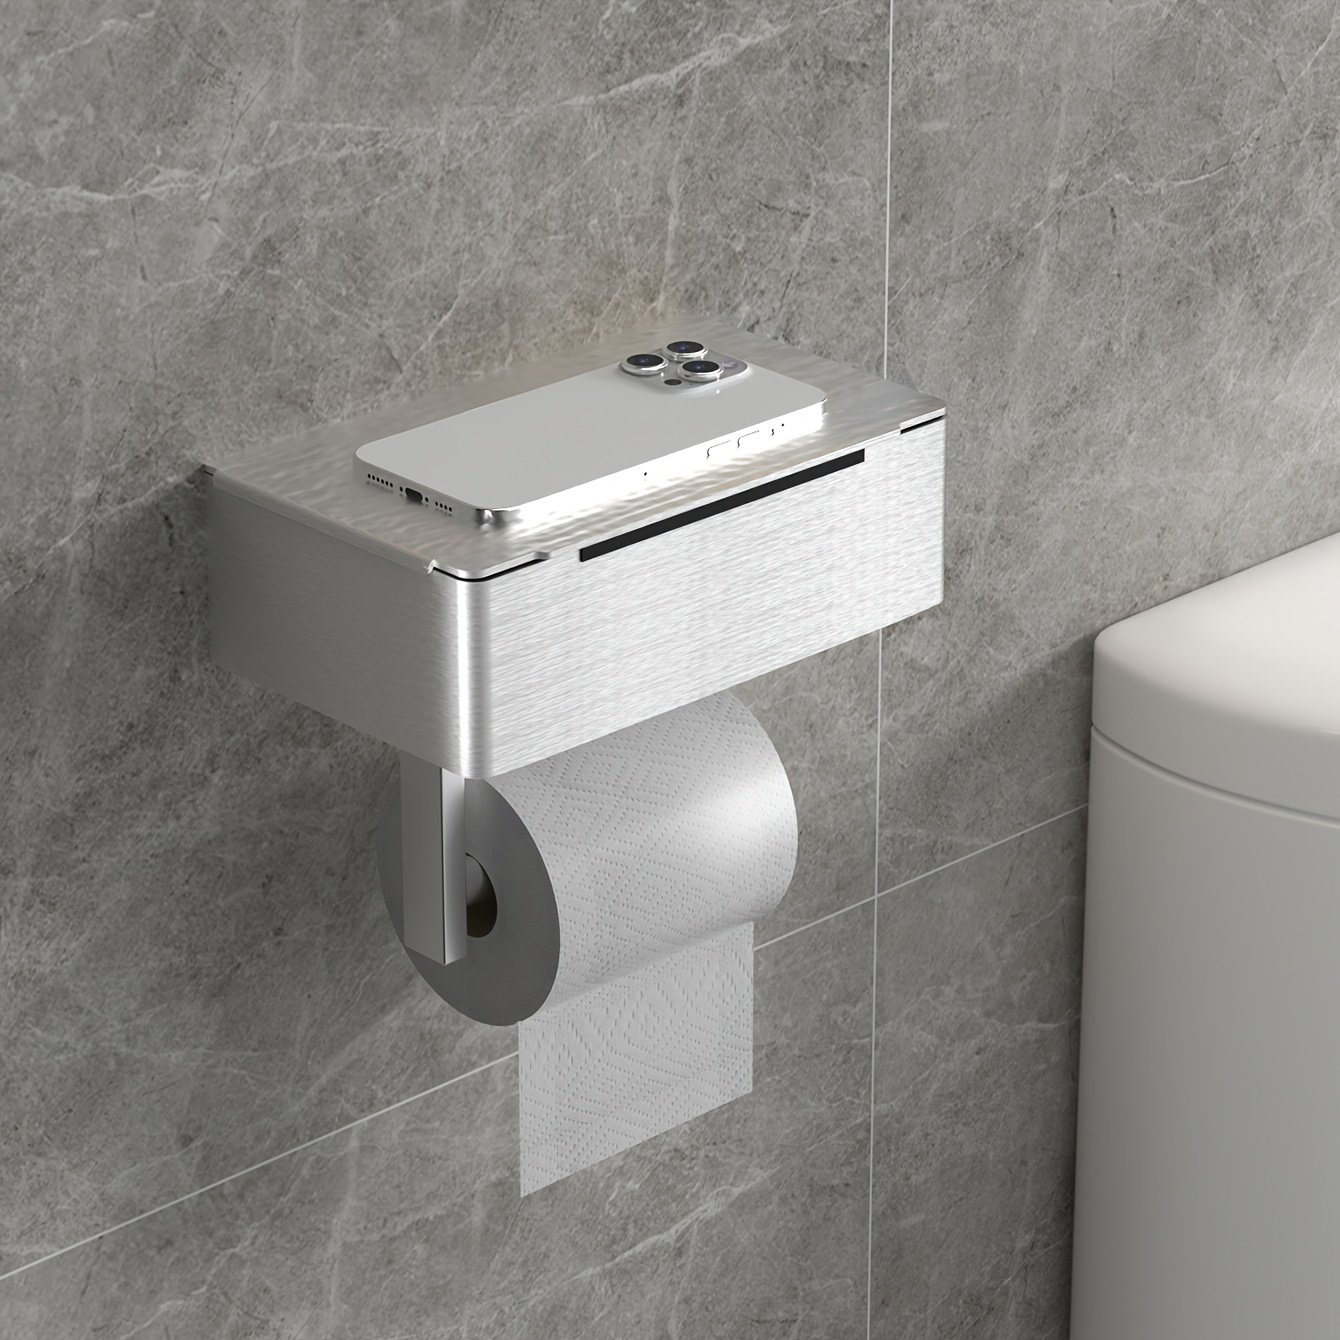 3d Please seat yourself toilet box - Rustic Toilet Paper Holder